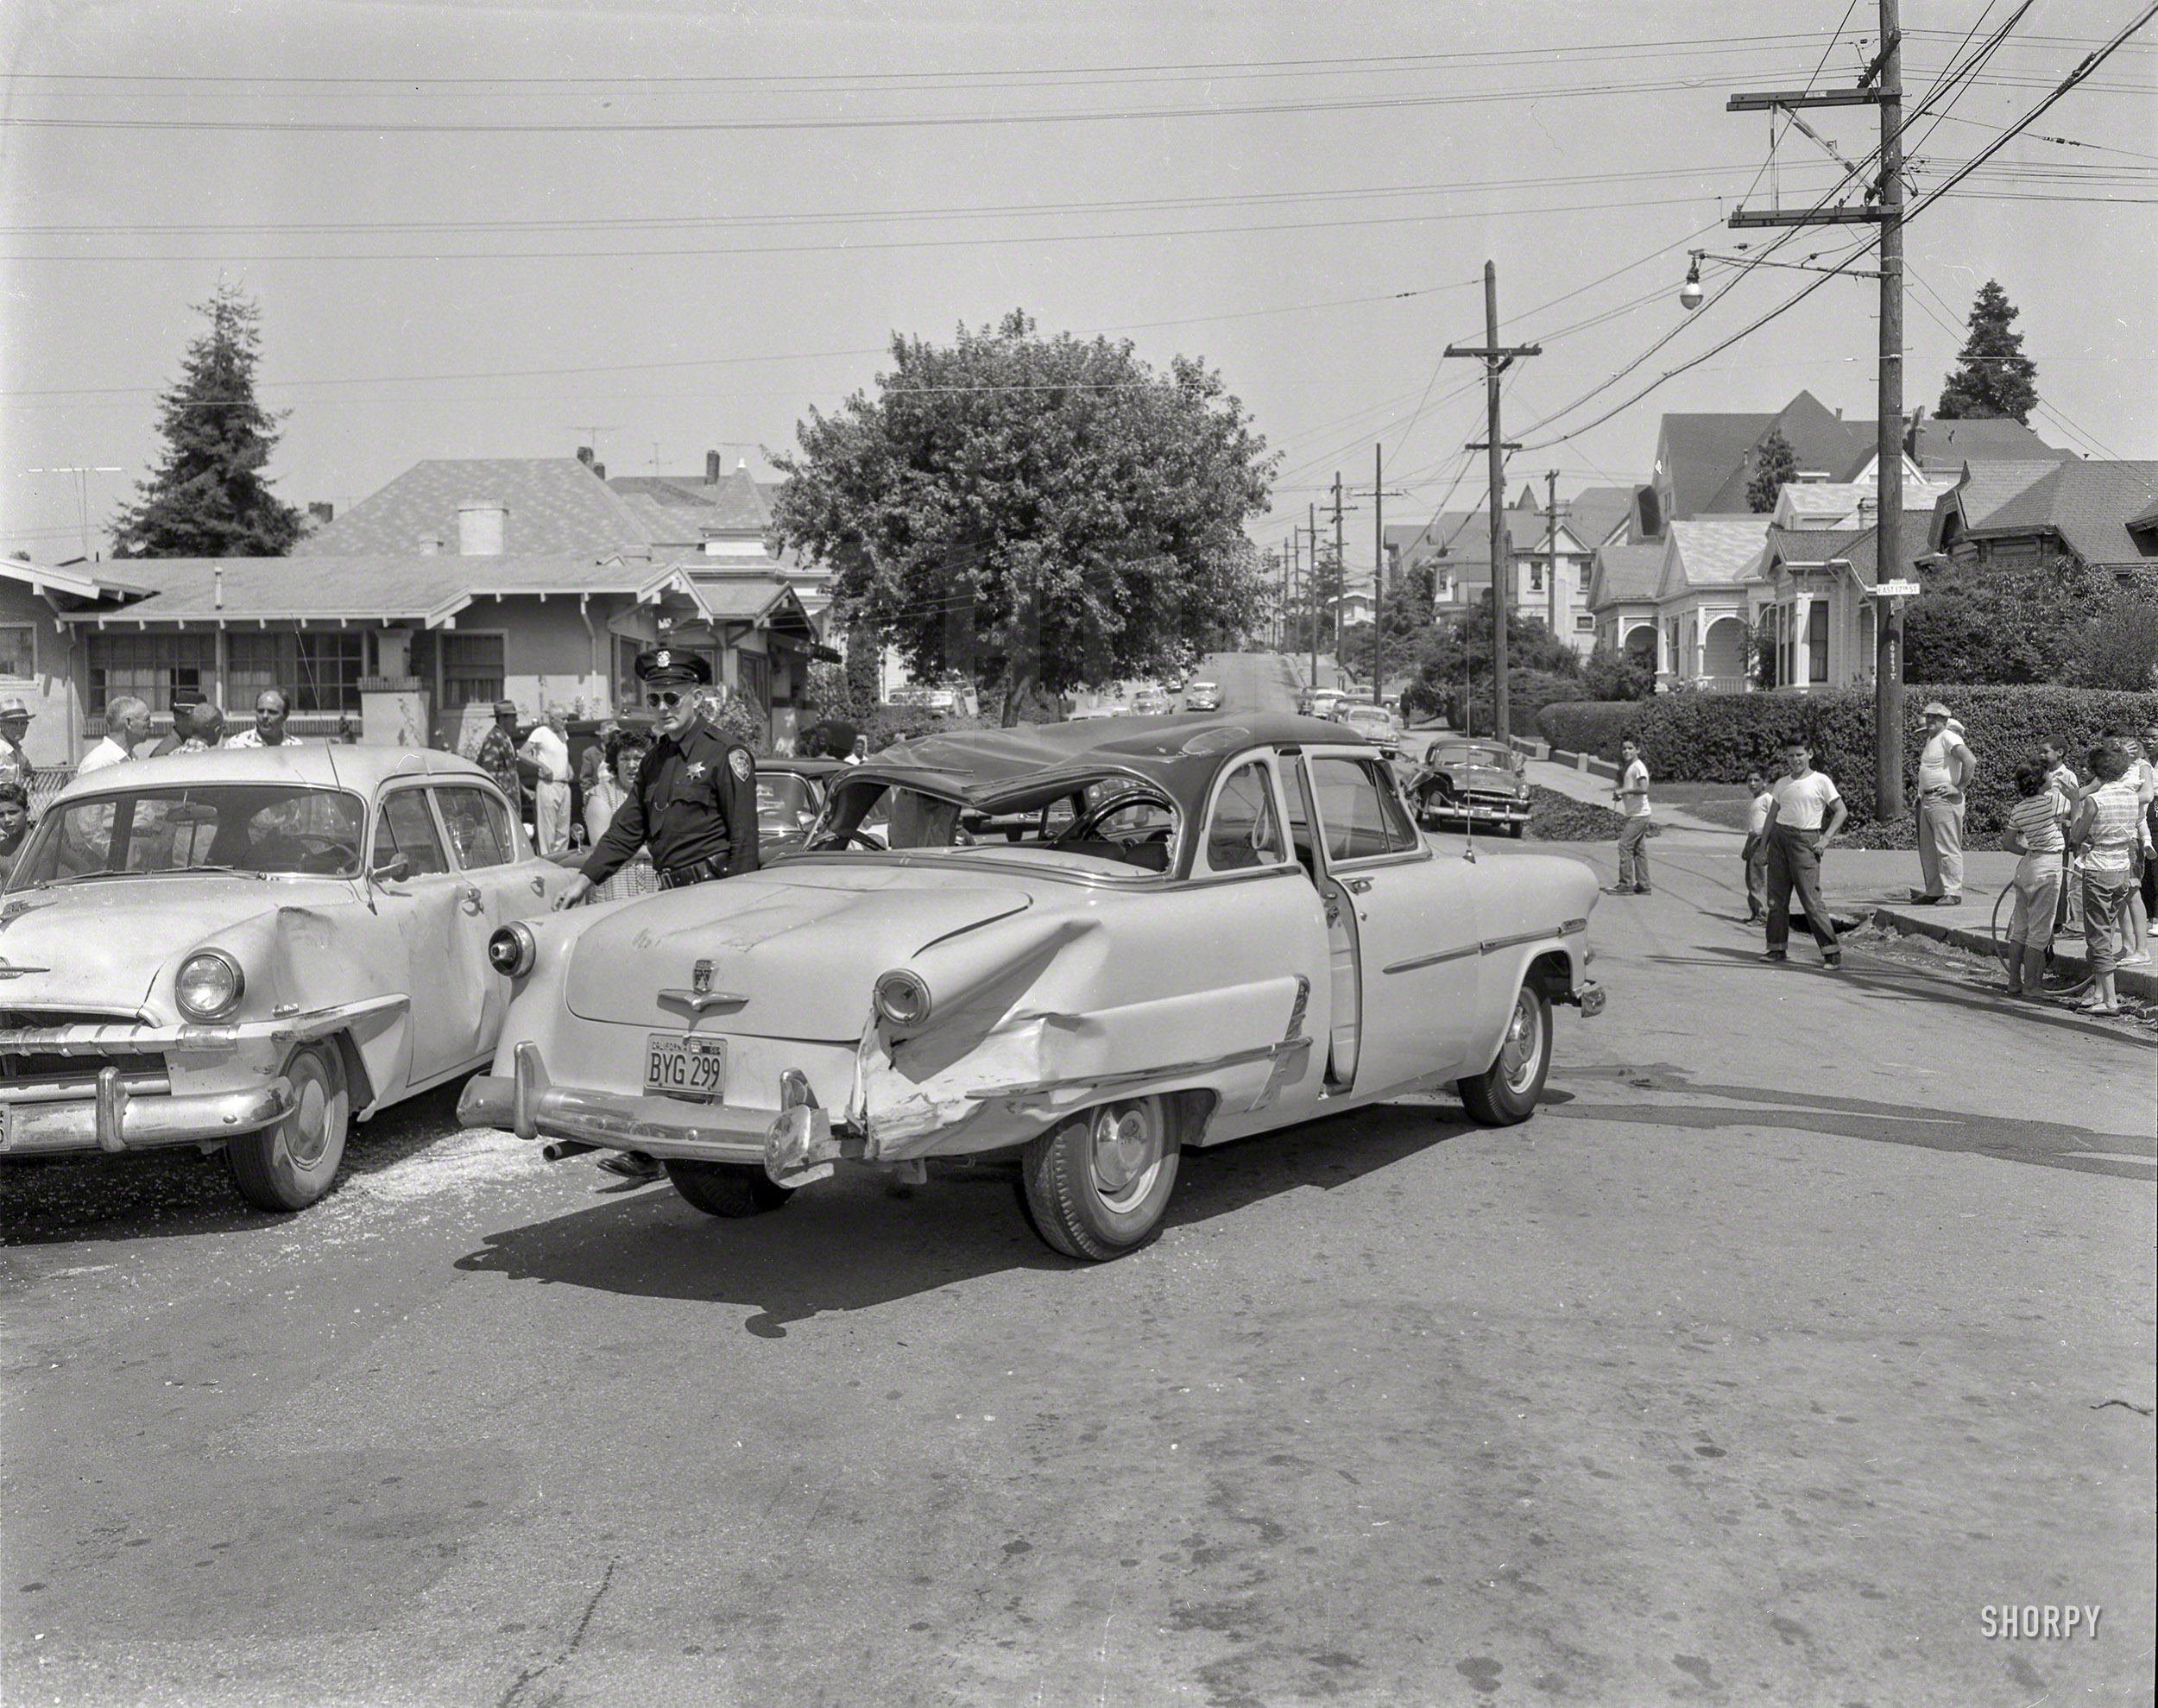 Plymouth vs. Ford on the streets of Oakland circa 1957, with a battered bystander in the distance. 4x5 safety negative from the News Archive. View full size.